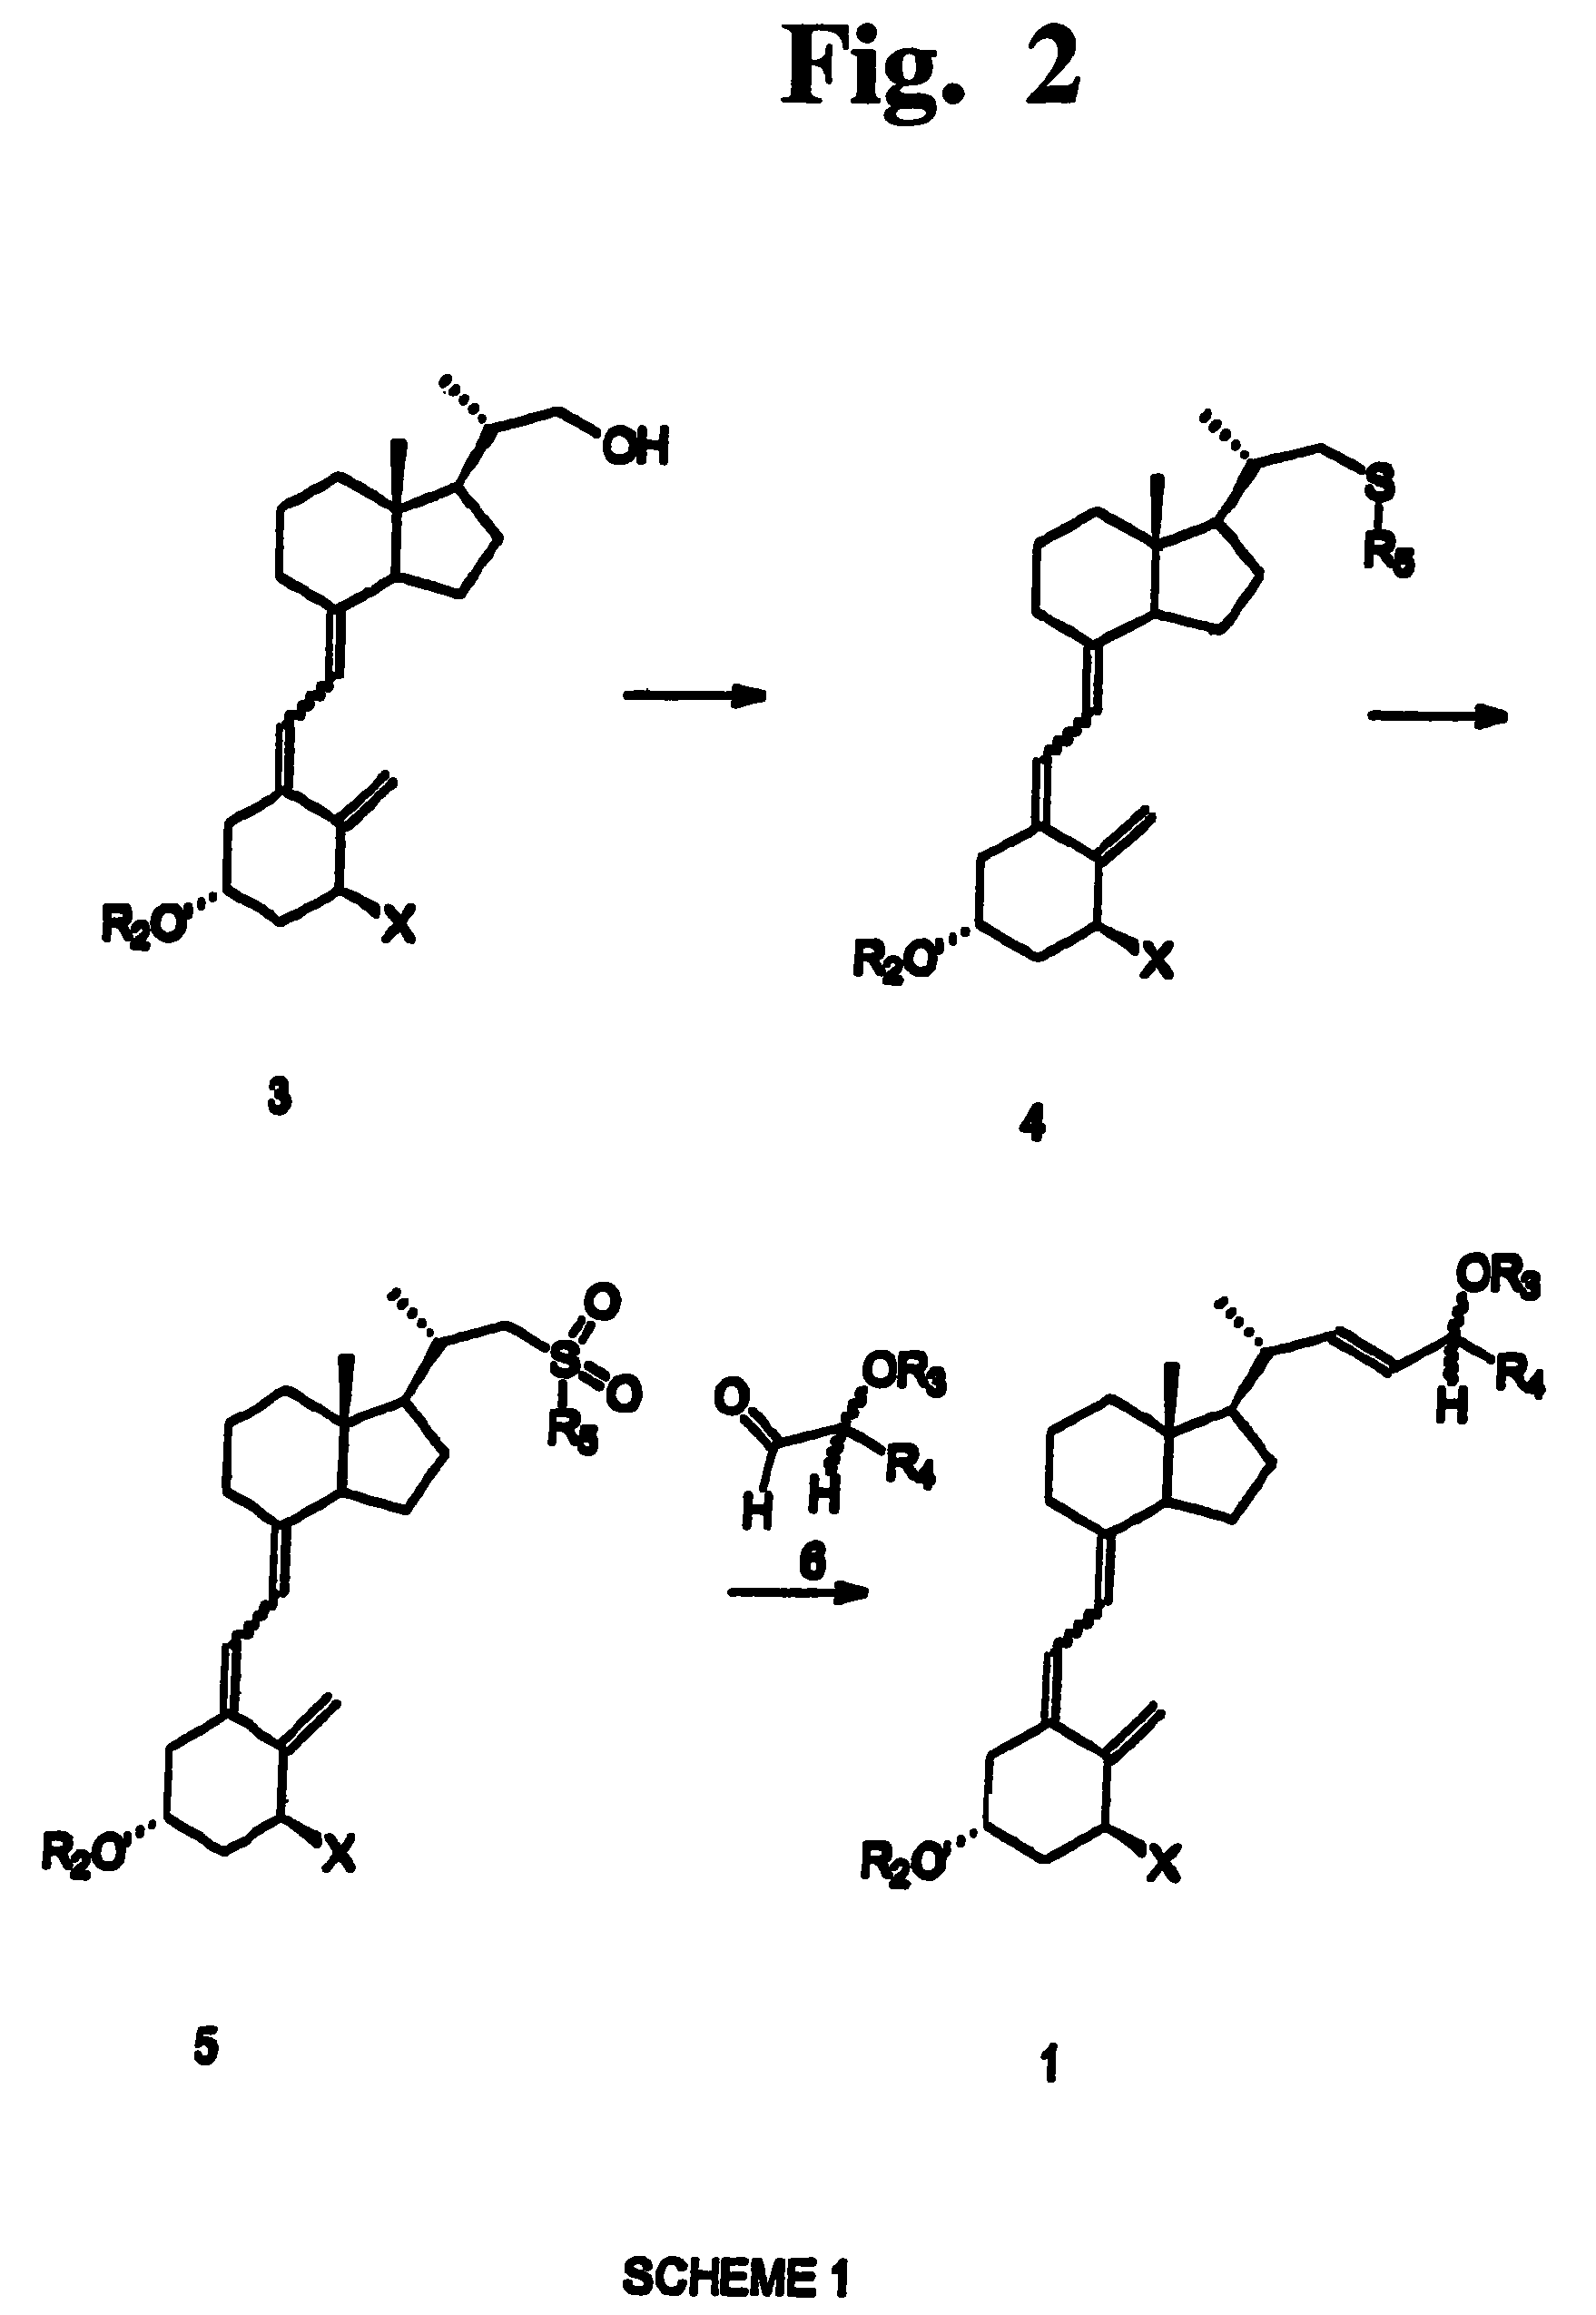 Preparation of 24 alkyl analogs of cholecalciferol and non-racemic compounds